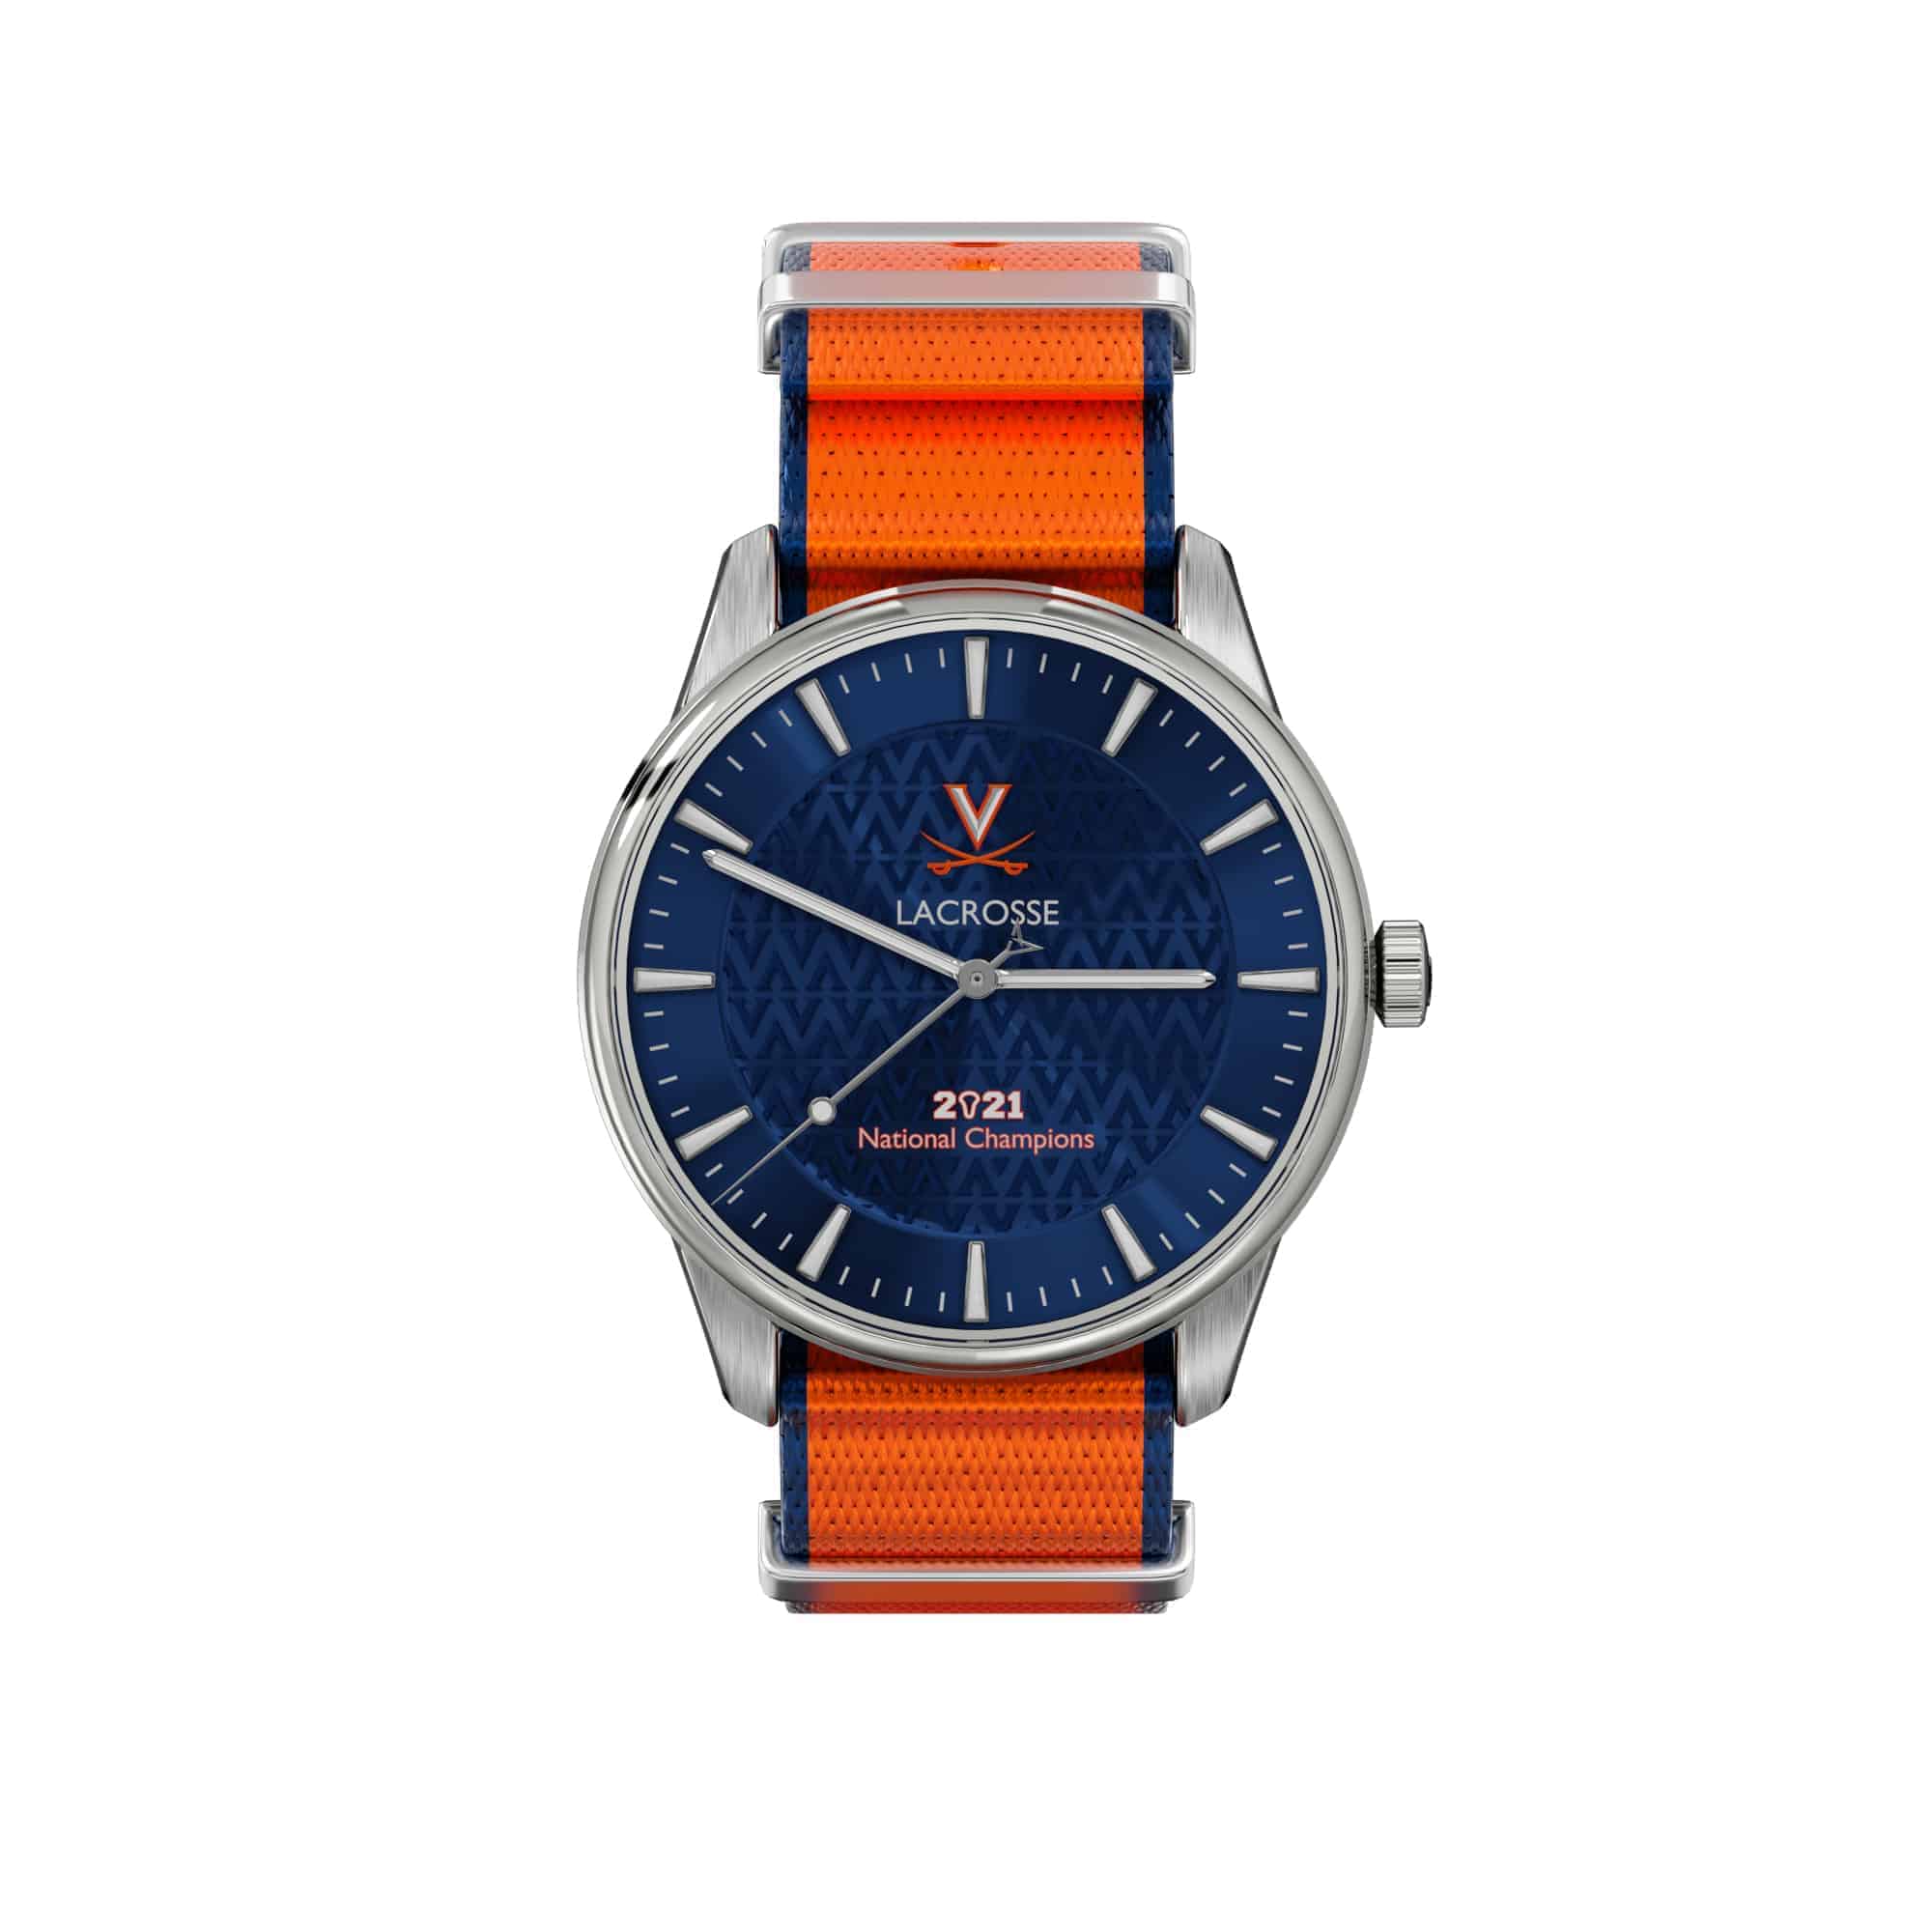 UVA Lacrosse 2021 National Champions Kairos front view with NATO strap